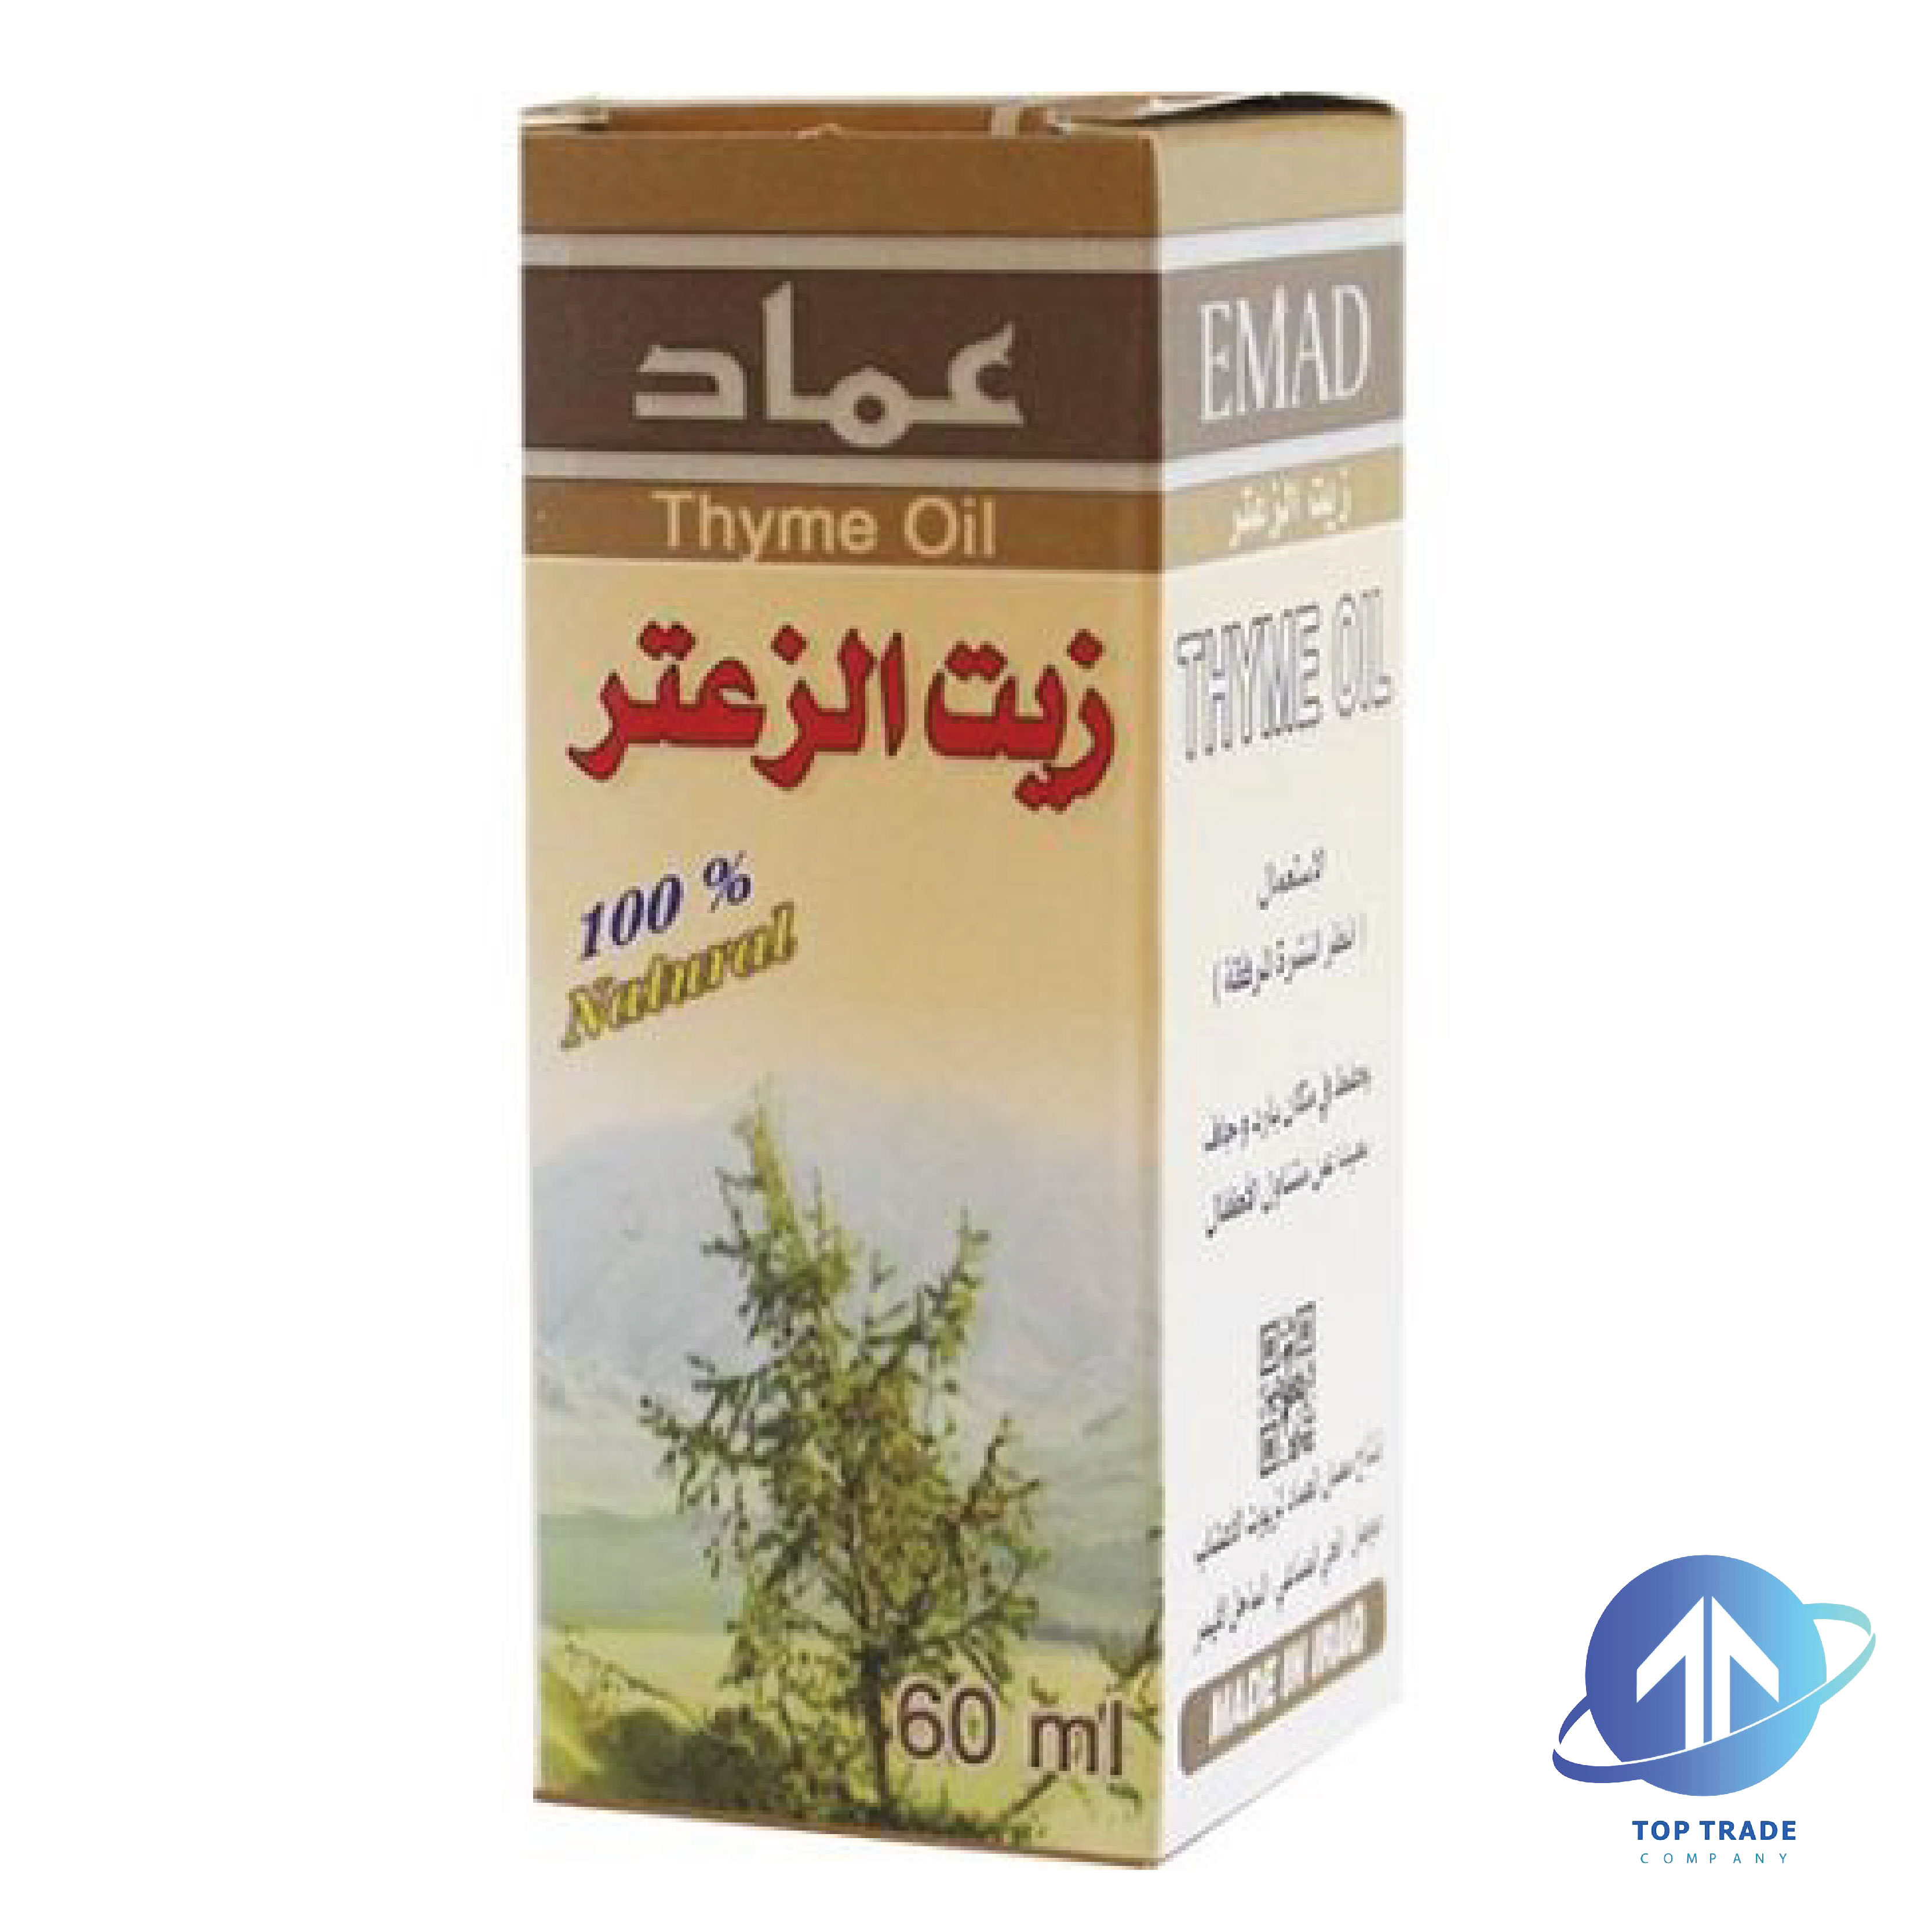 Emad Thyme oil 60ML